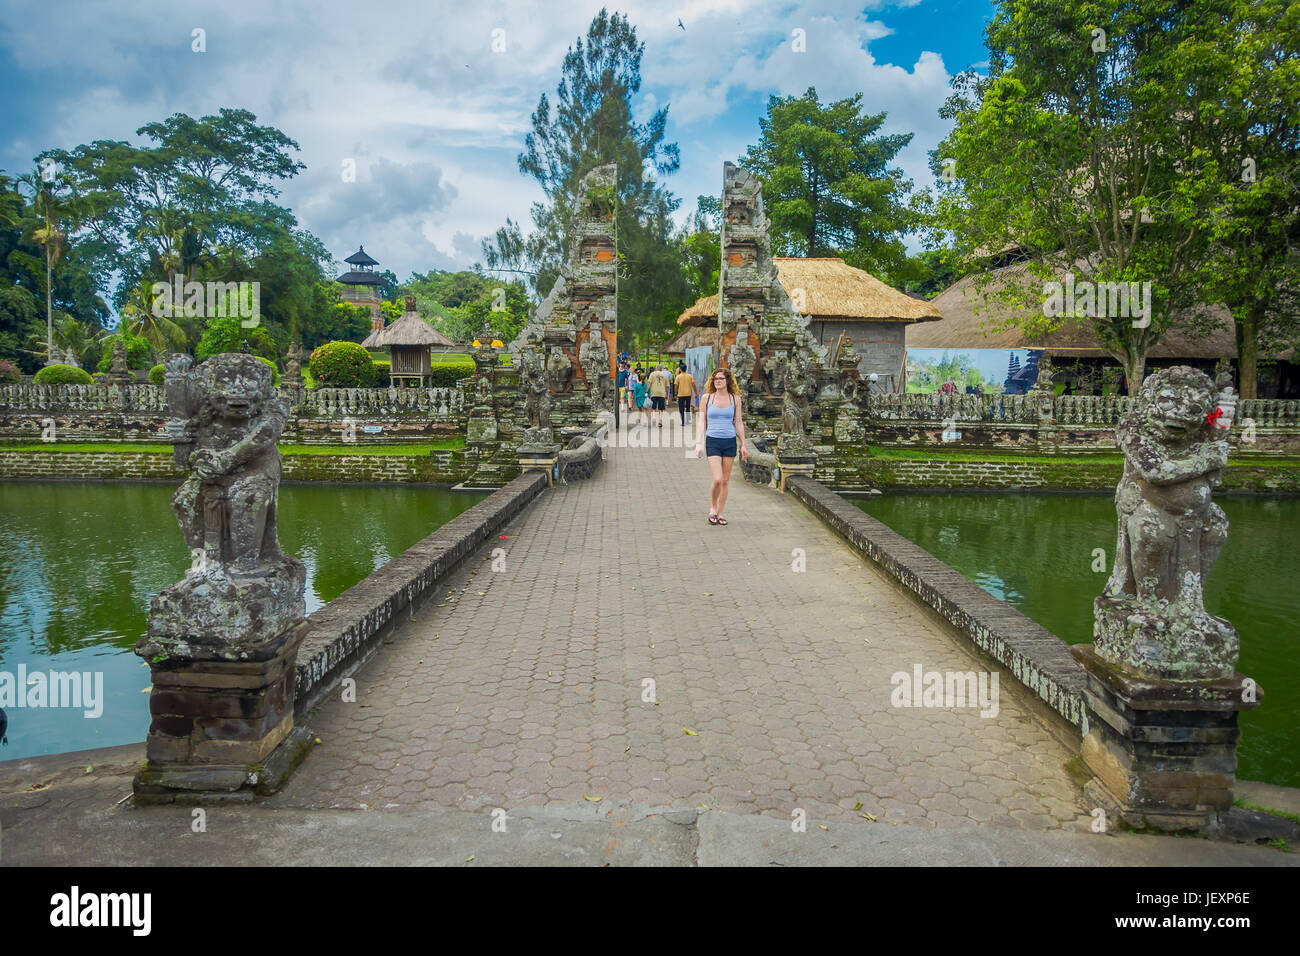 BALI, INDONESIA - MARCH 08, 2017: Unidentified woman walking inside of the temple of Mengwi Empire located in Mengwi, Badung regency that is famous pl Stock Photo